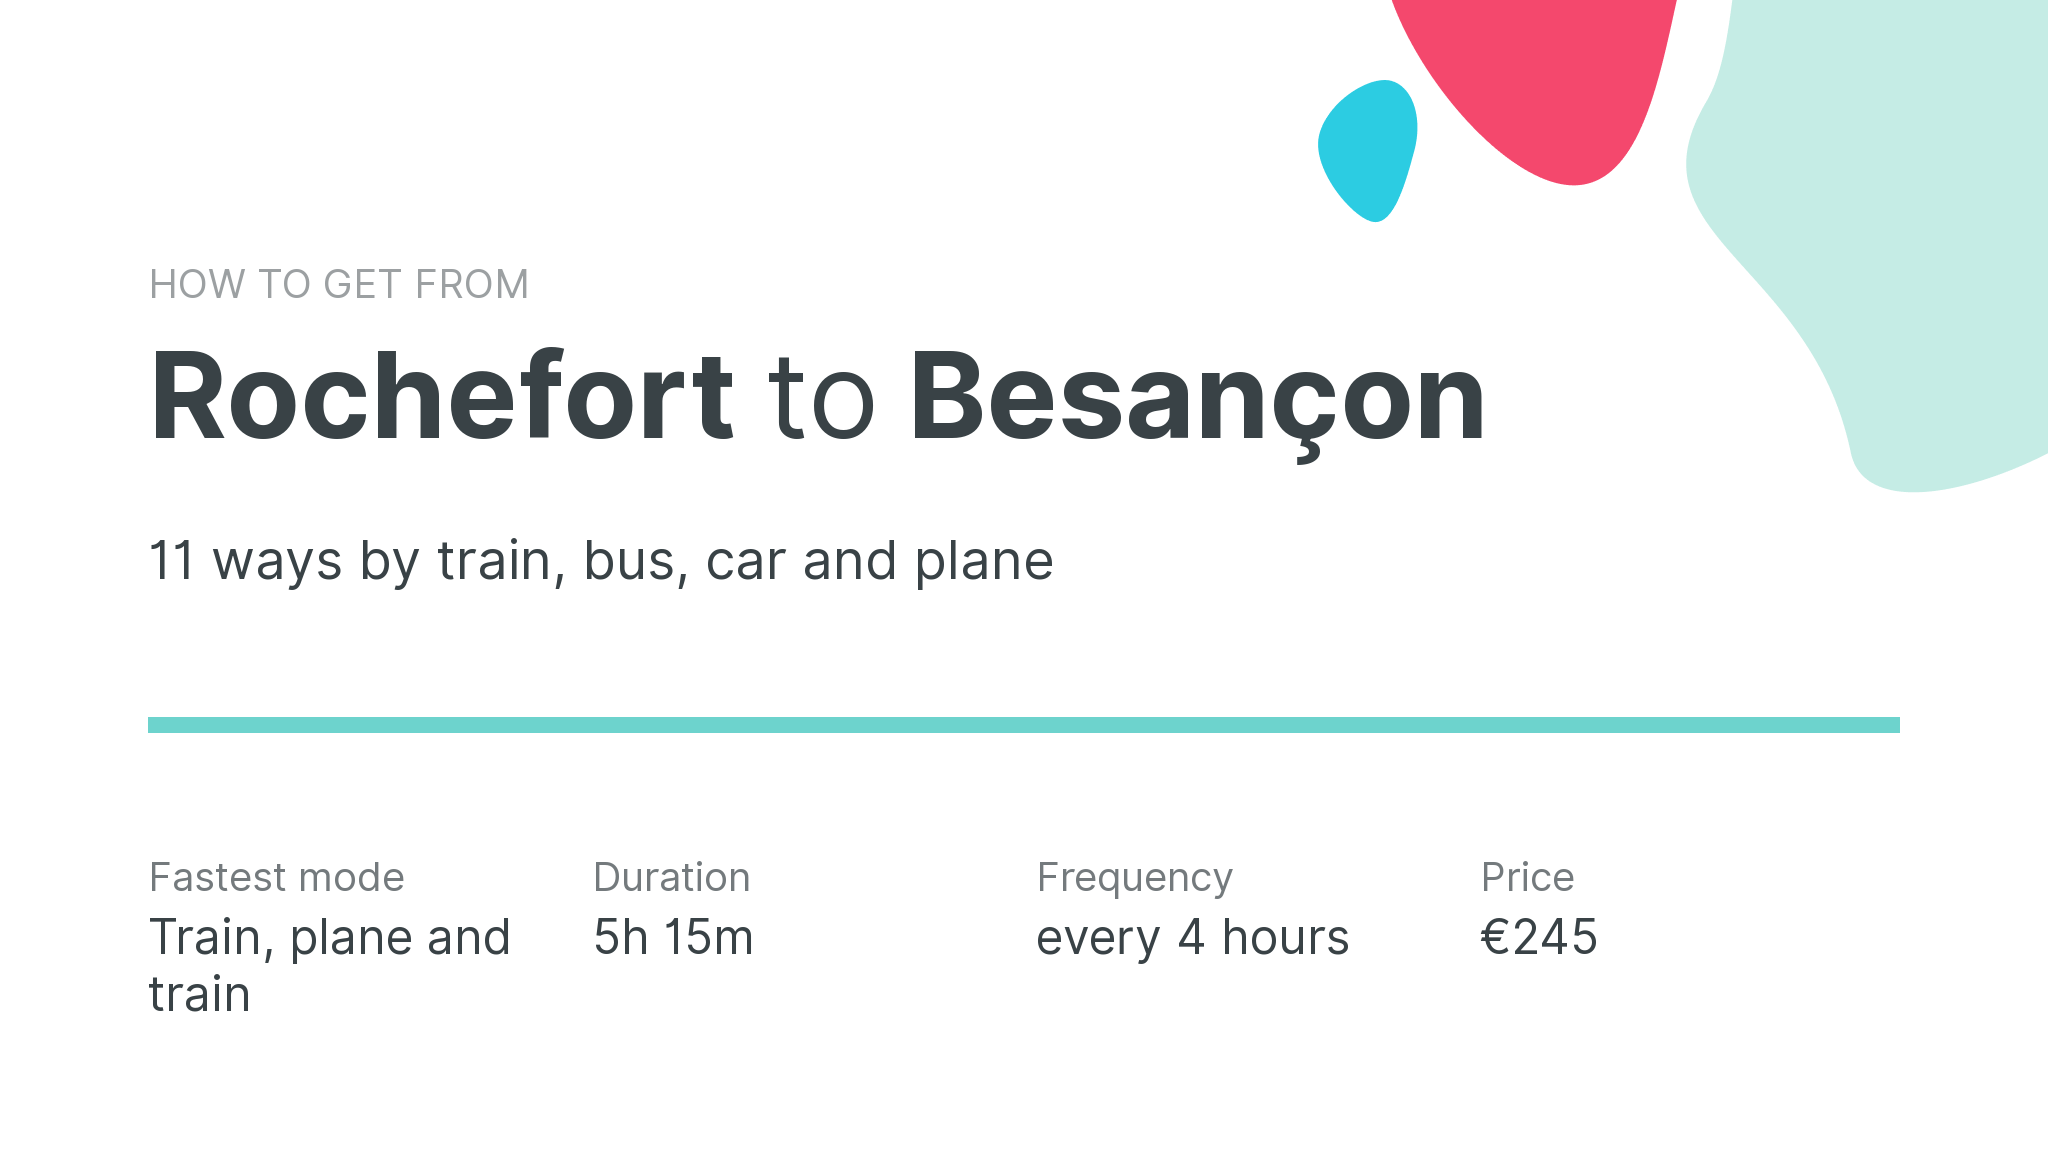 How do I get from Rochefort to Besançon